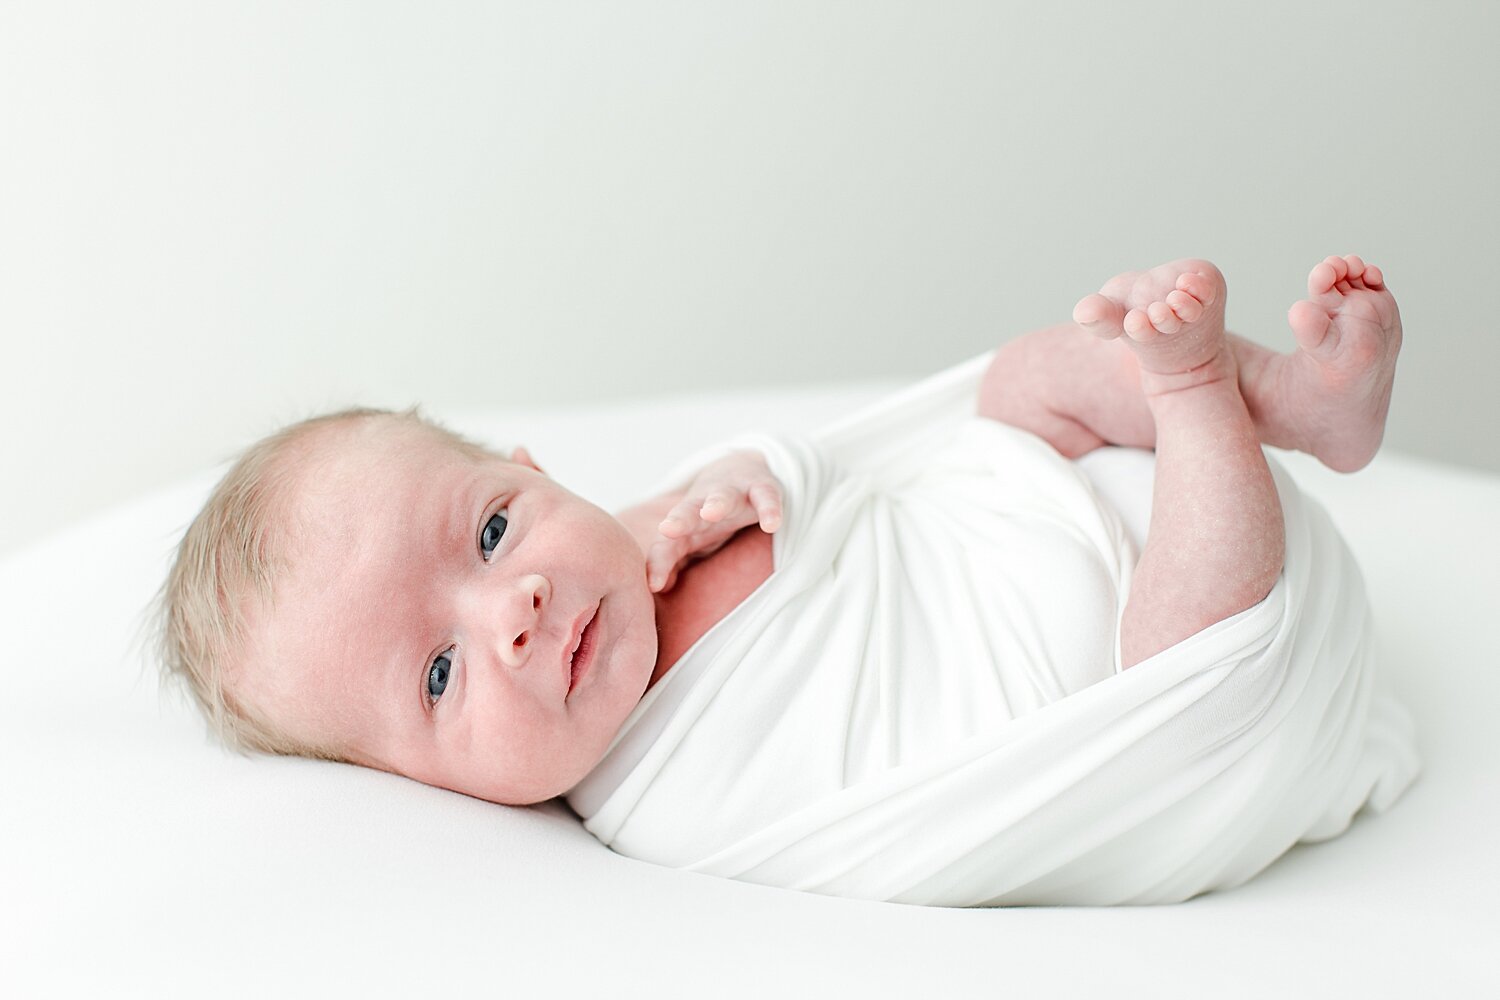 Newborn awake for photoshoot looking right at the camera. Photos by CT Newborn Photographer, Kristin Wood Photography.